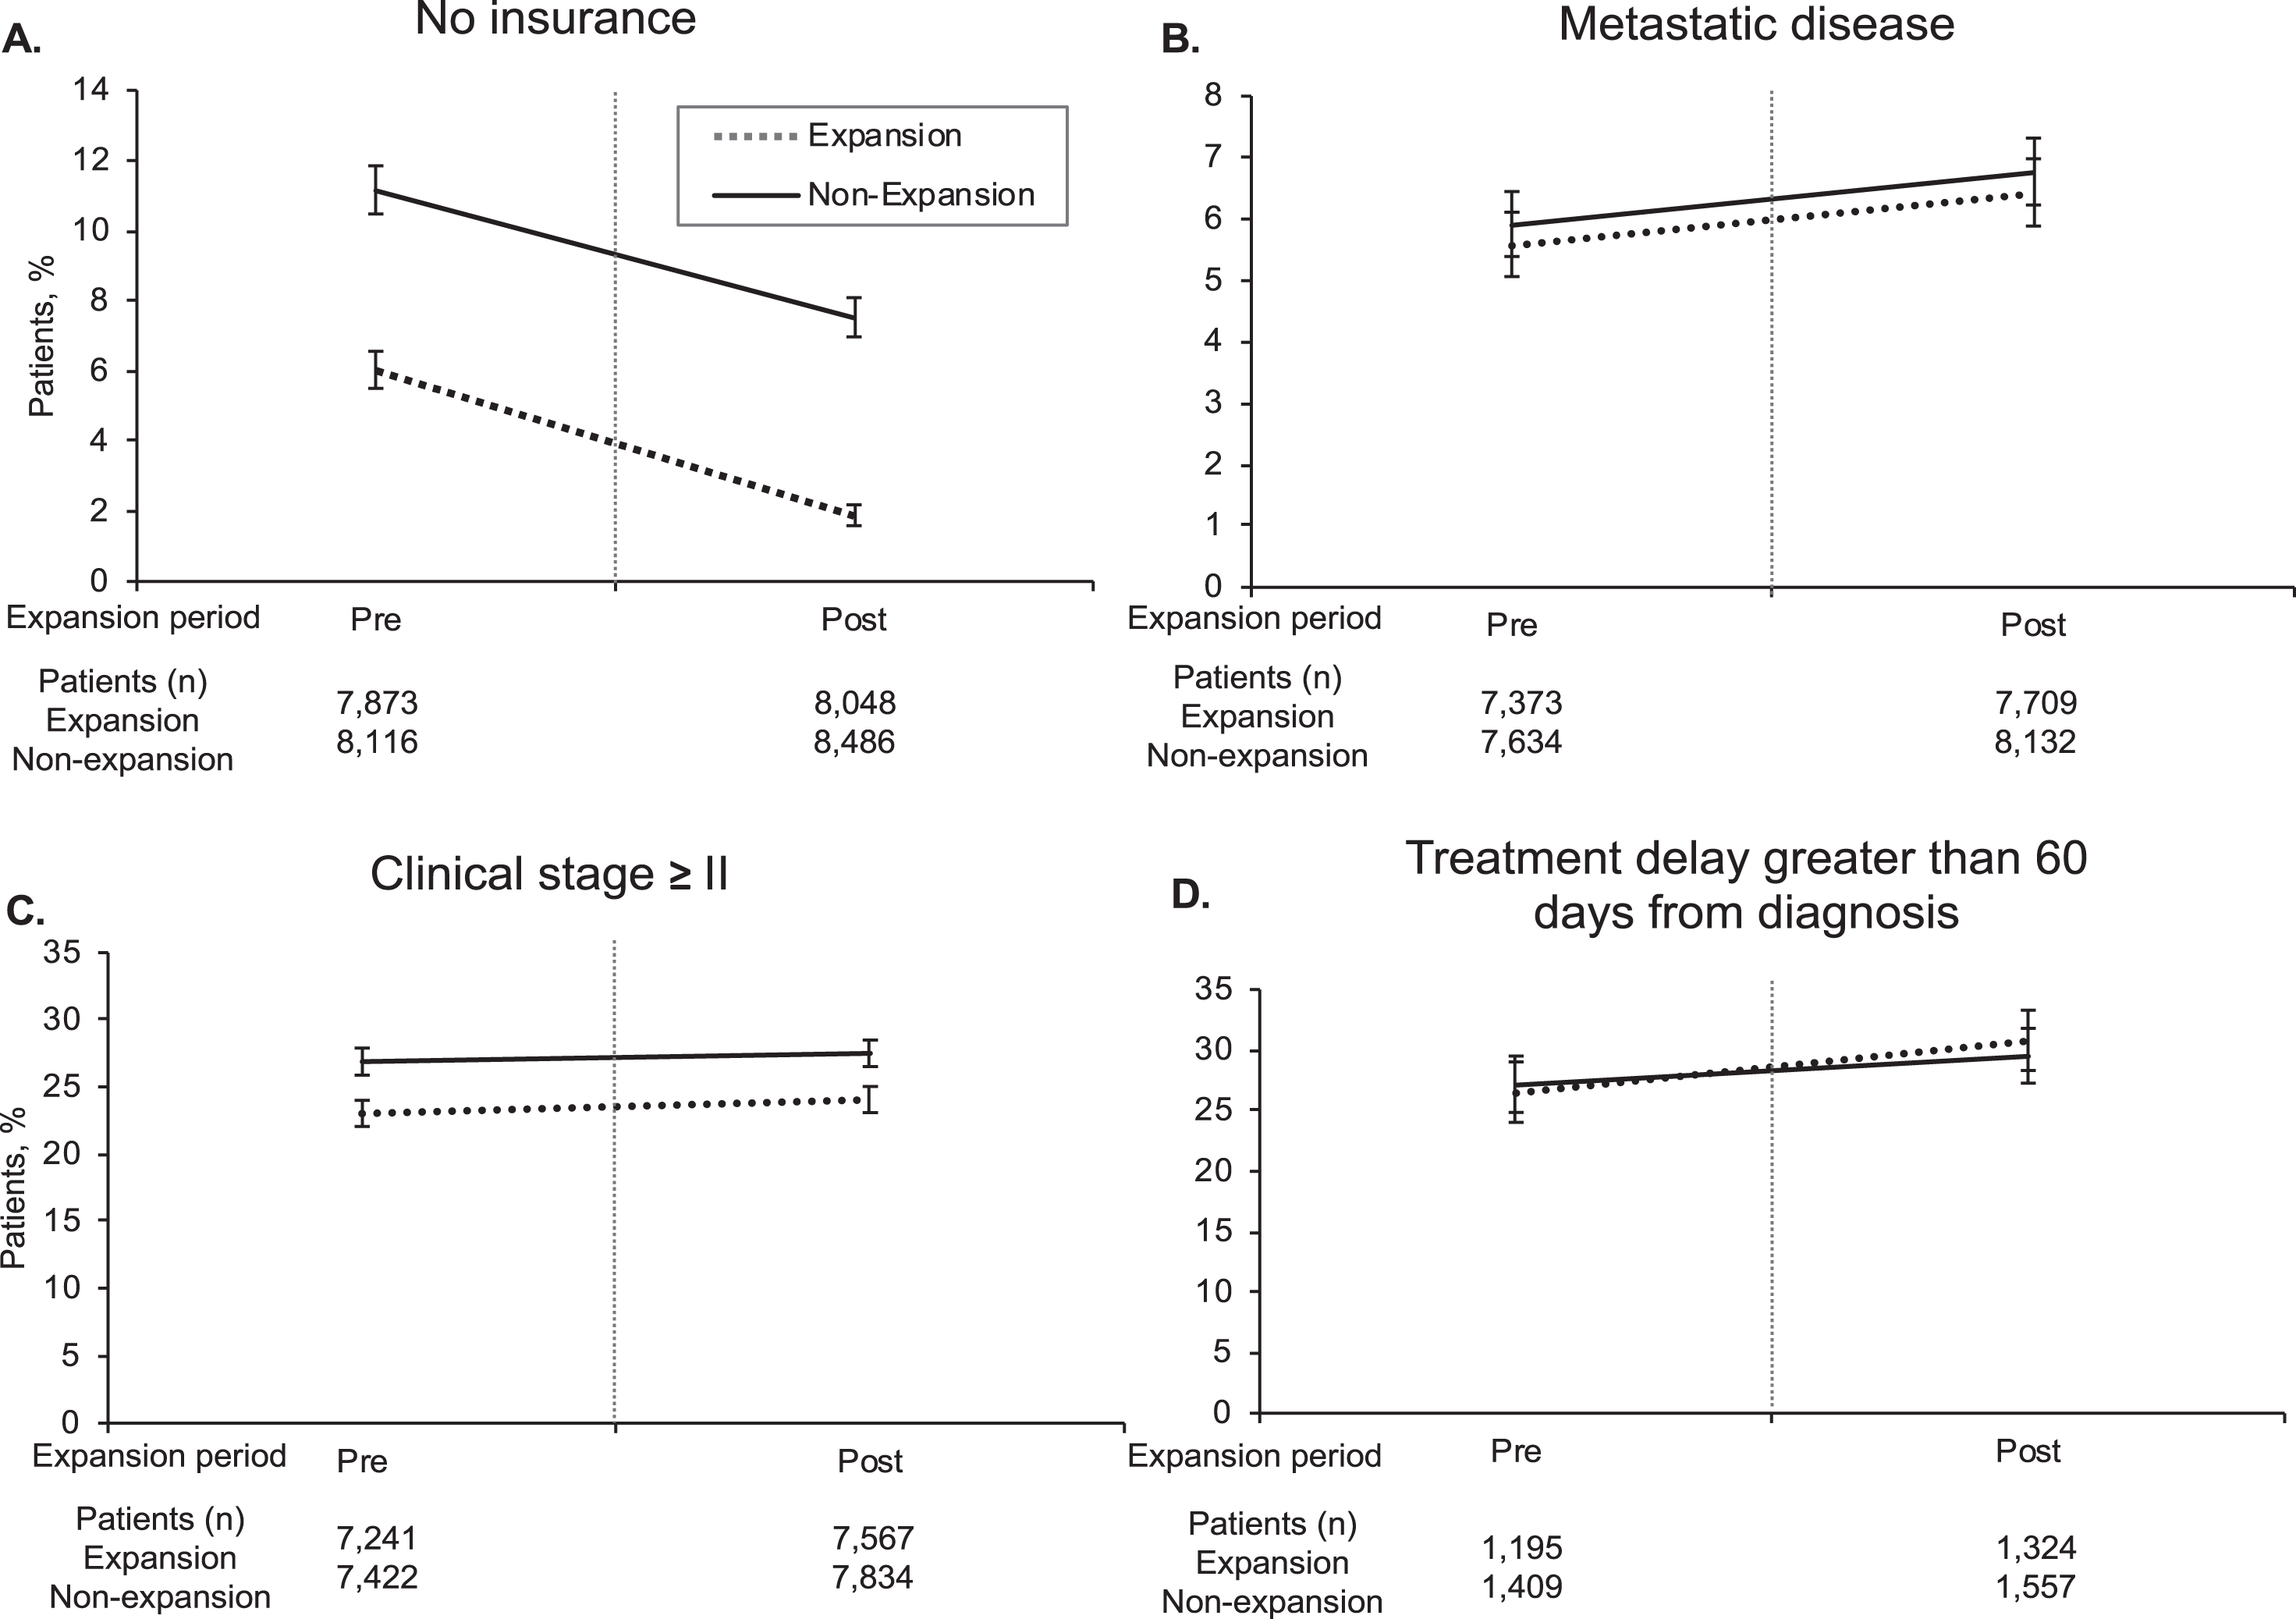 Temporal Trends in Outcomes Pre- and Post-Medicaid Expansion. Vertical line denotes pre- and post-insurance expansion. Error bars denote 95% confidence intervals. Treatment delay analysis included only stage≥II cancer.